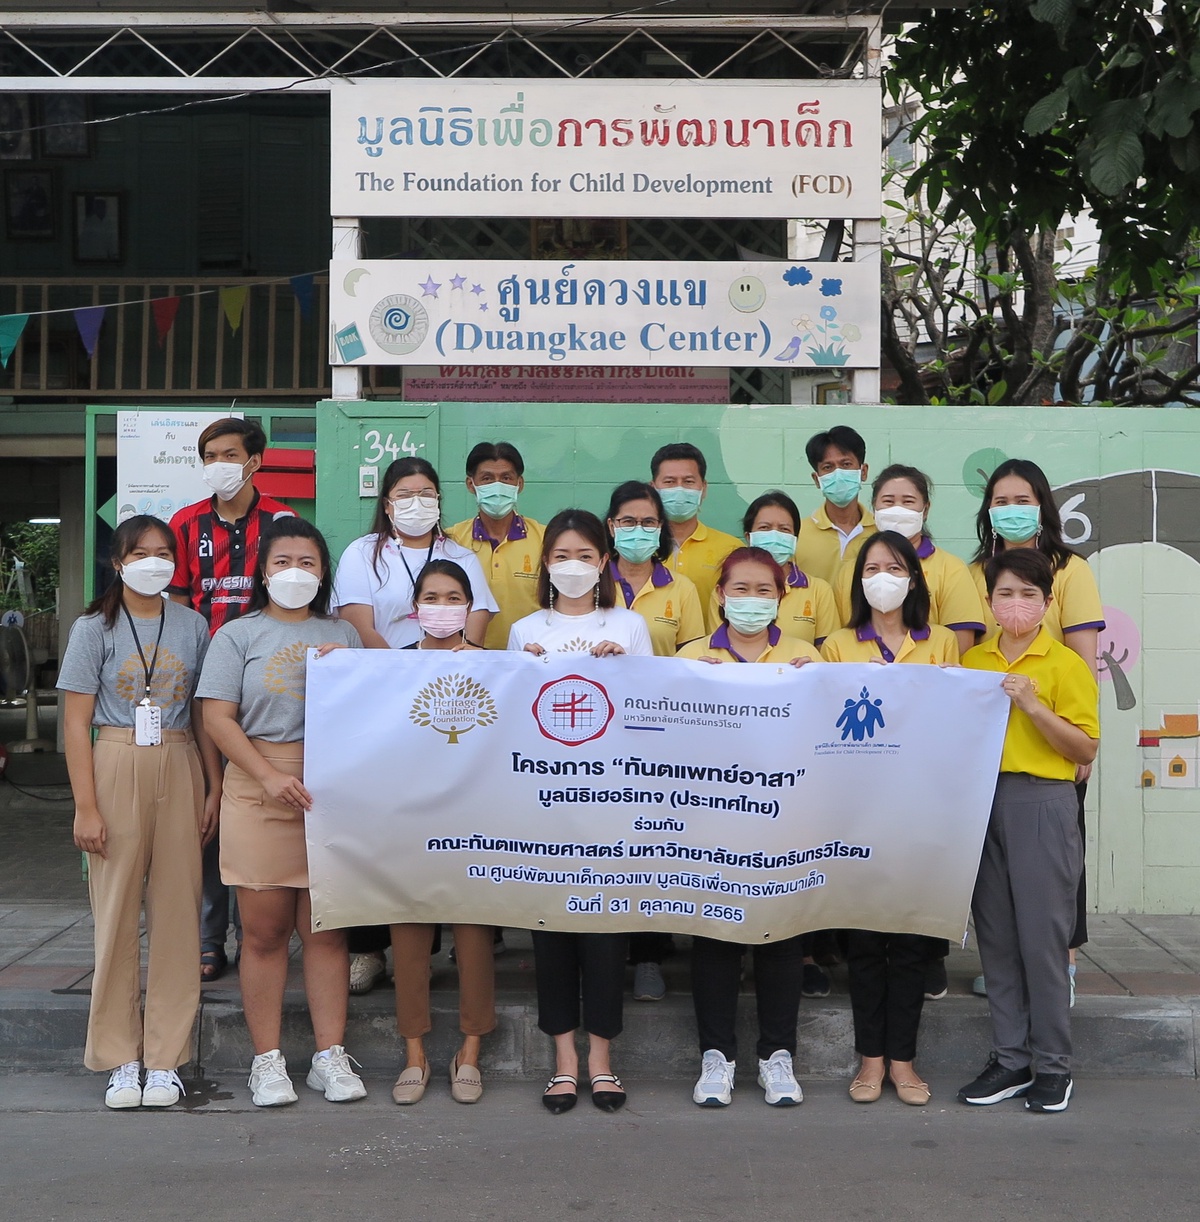 Heritage Thailand Foundation with Srinakharinwirot University Brings Dentist Volunteer Campaign to The Foundation for Child Development at Duangkae Center